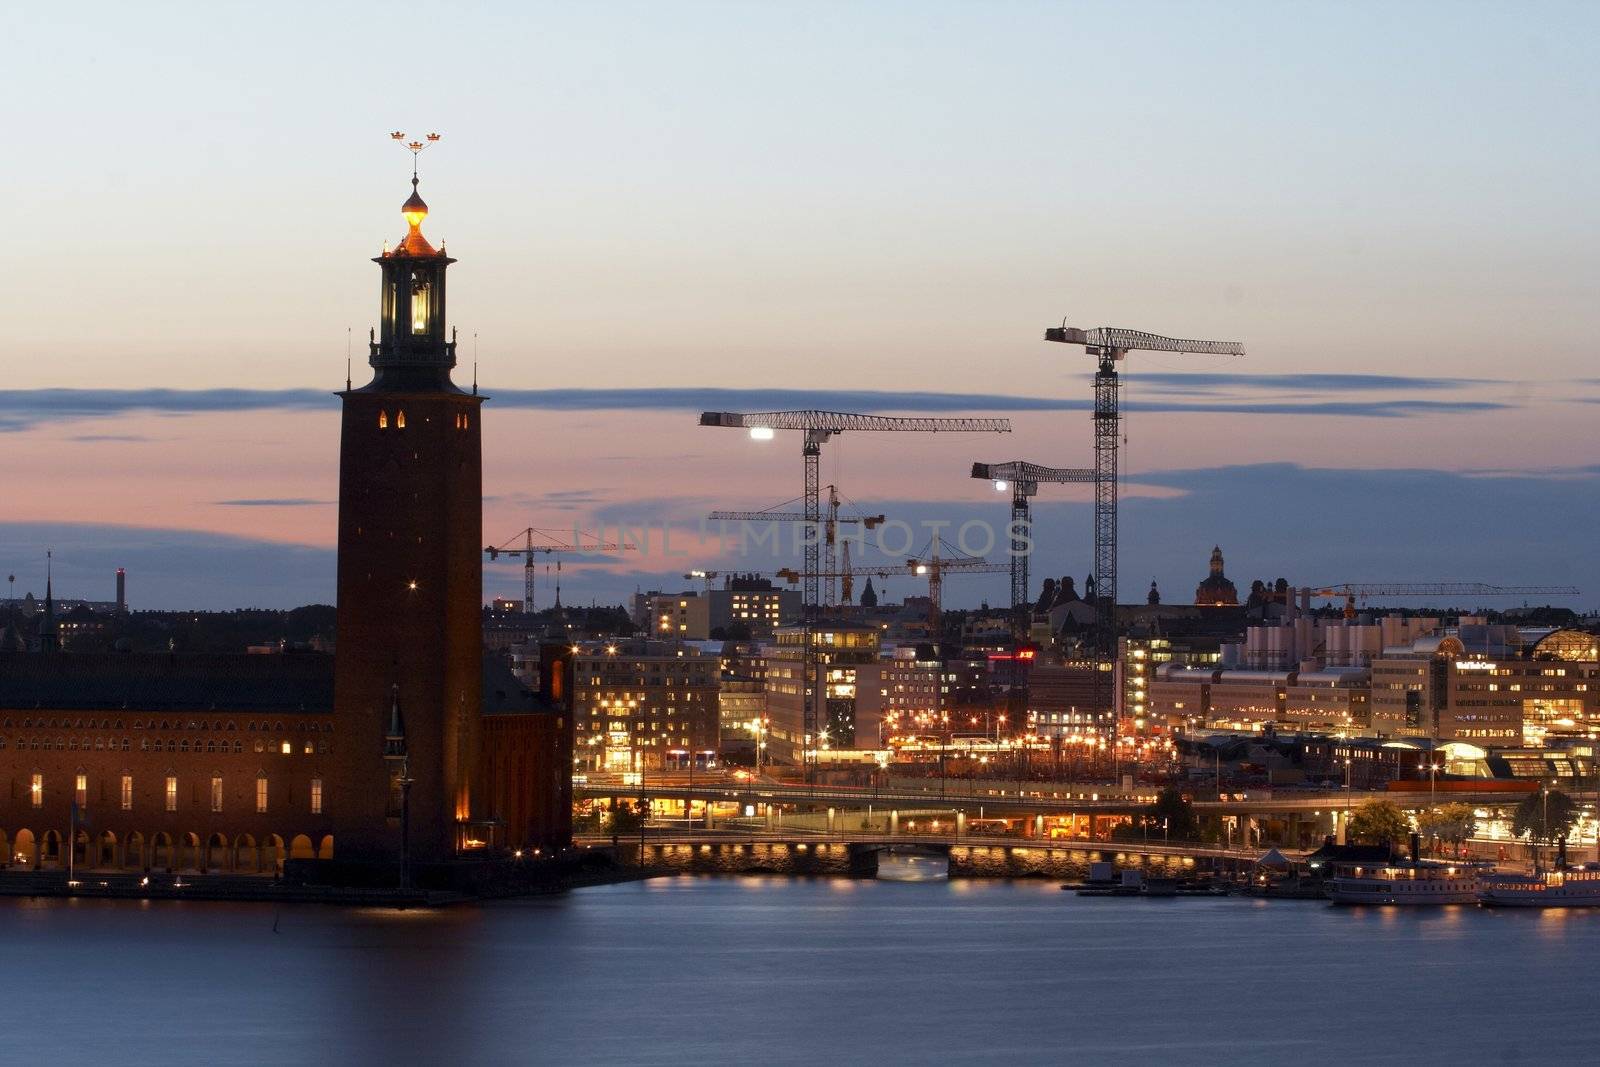 Old town of Stockholm and township at dusk by andrius